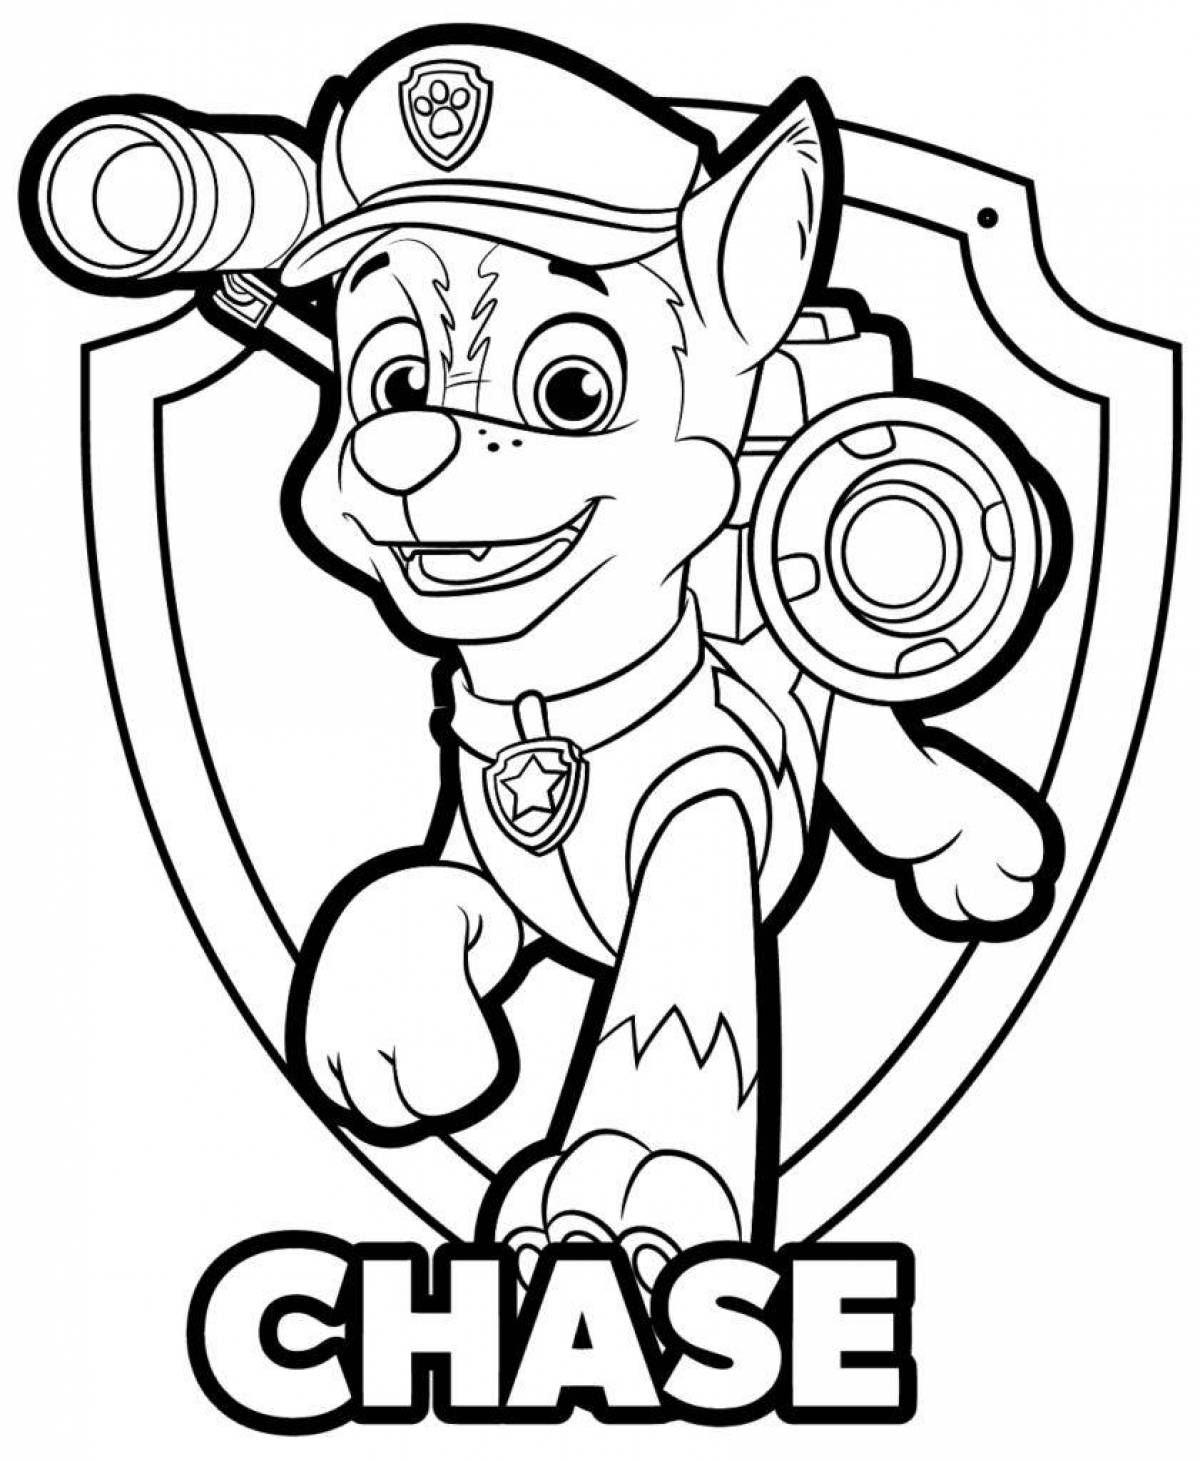 Colorful patrol coloring page